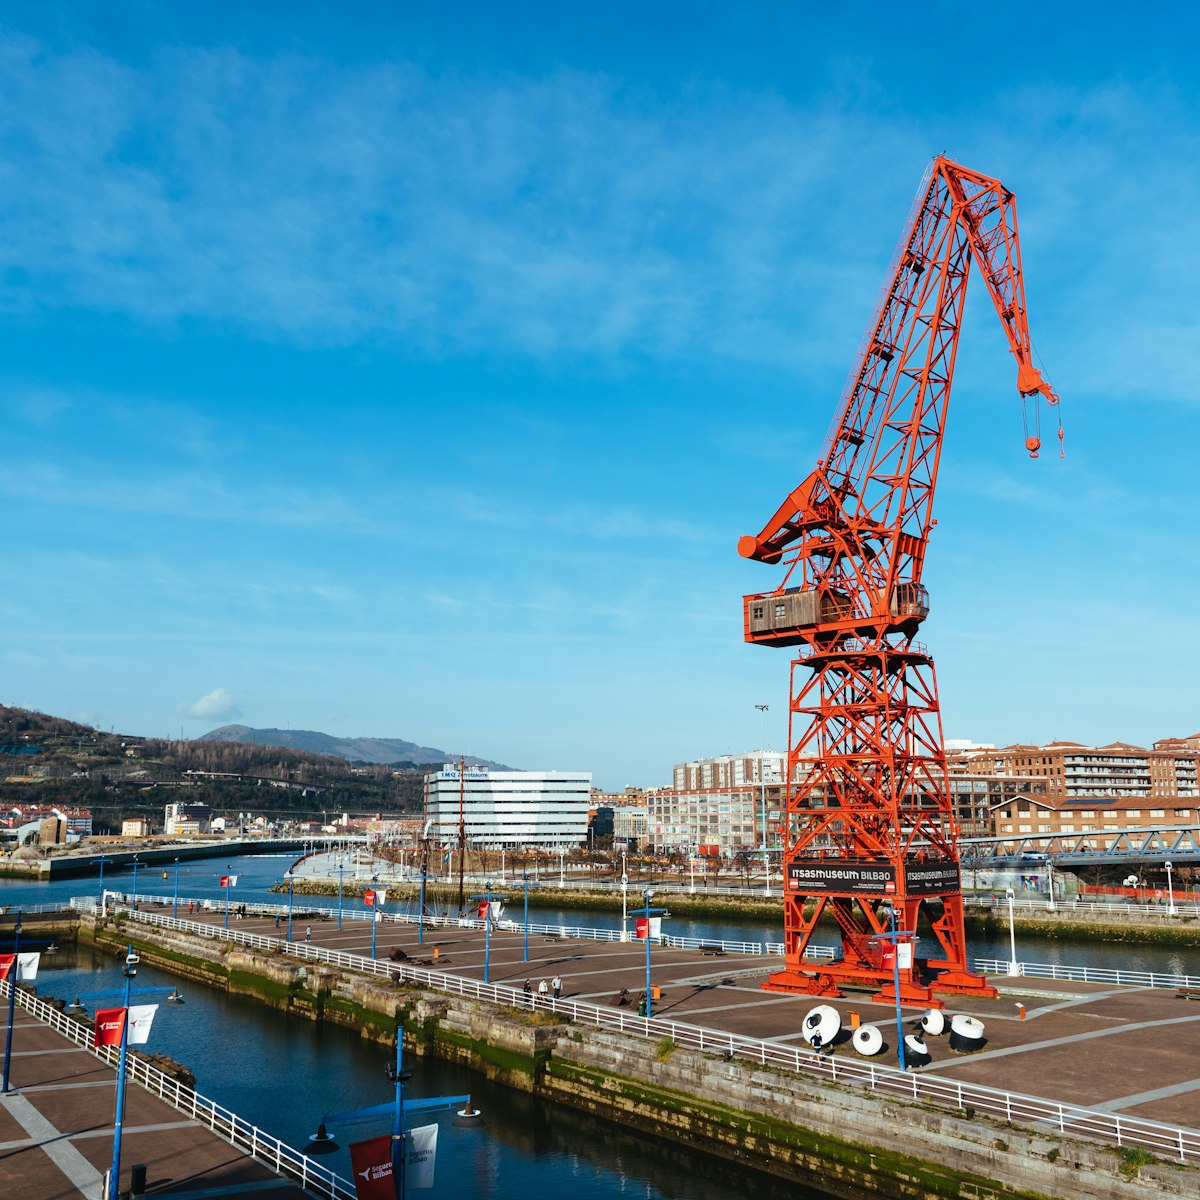 Bilbao, Spain - February 13, 2022: View of Carola Crane. It is a crane that was once used in shipbuilding at the Astilleros Euskalduna shipyard, now is part of Maritime Museum.